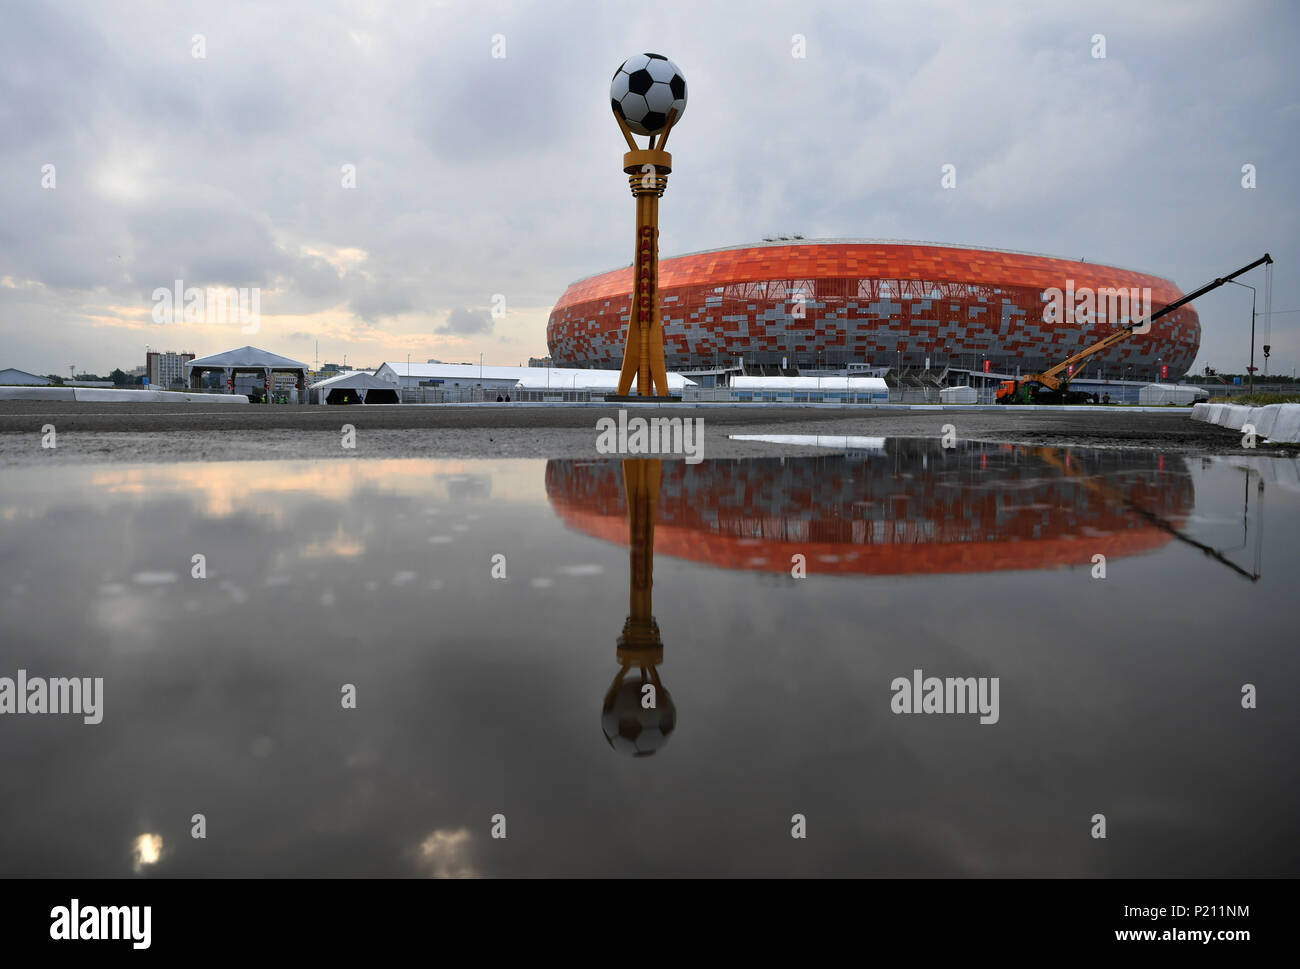 Saransk. 13th June, 2018. Photo taken on June 13, 2018 shows the Mordovia Arena, which will host four group phase matches during the 2018 FIFA World Cup, in Saransk, Russia. Credit: Lui Siu Wai/Xinhua/Alamy Live News Stock Photo